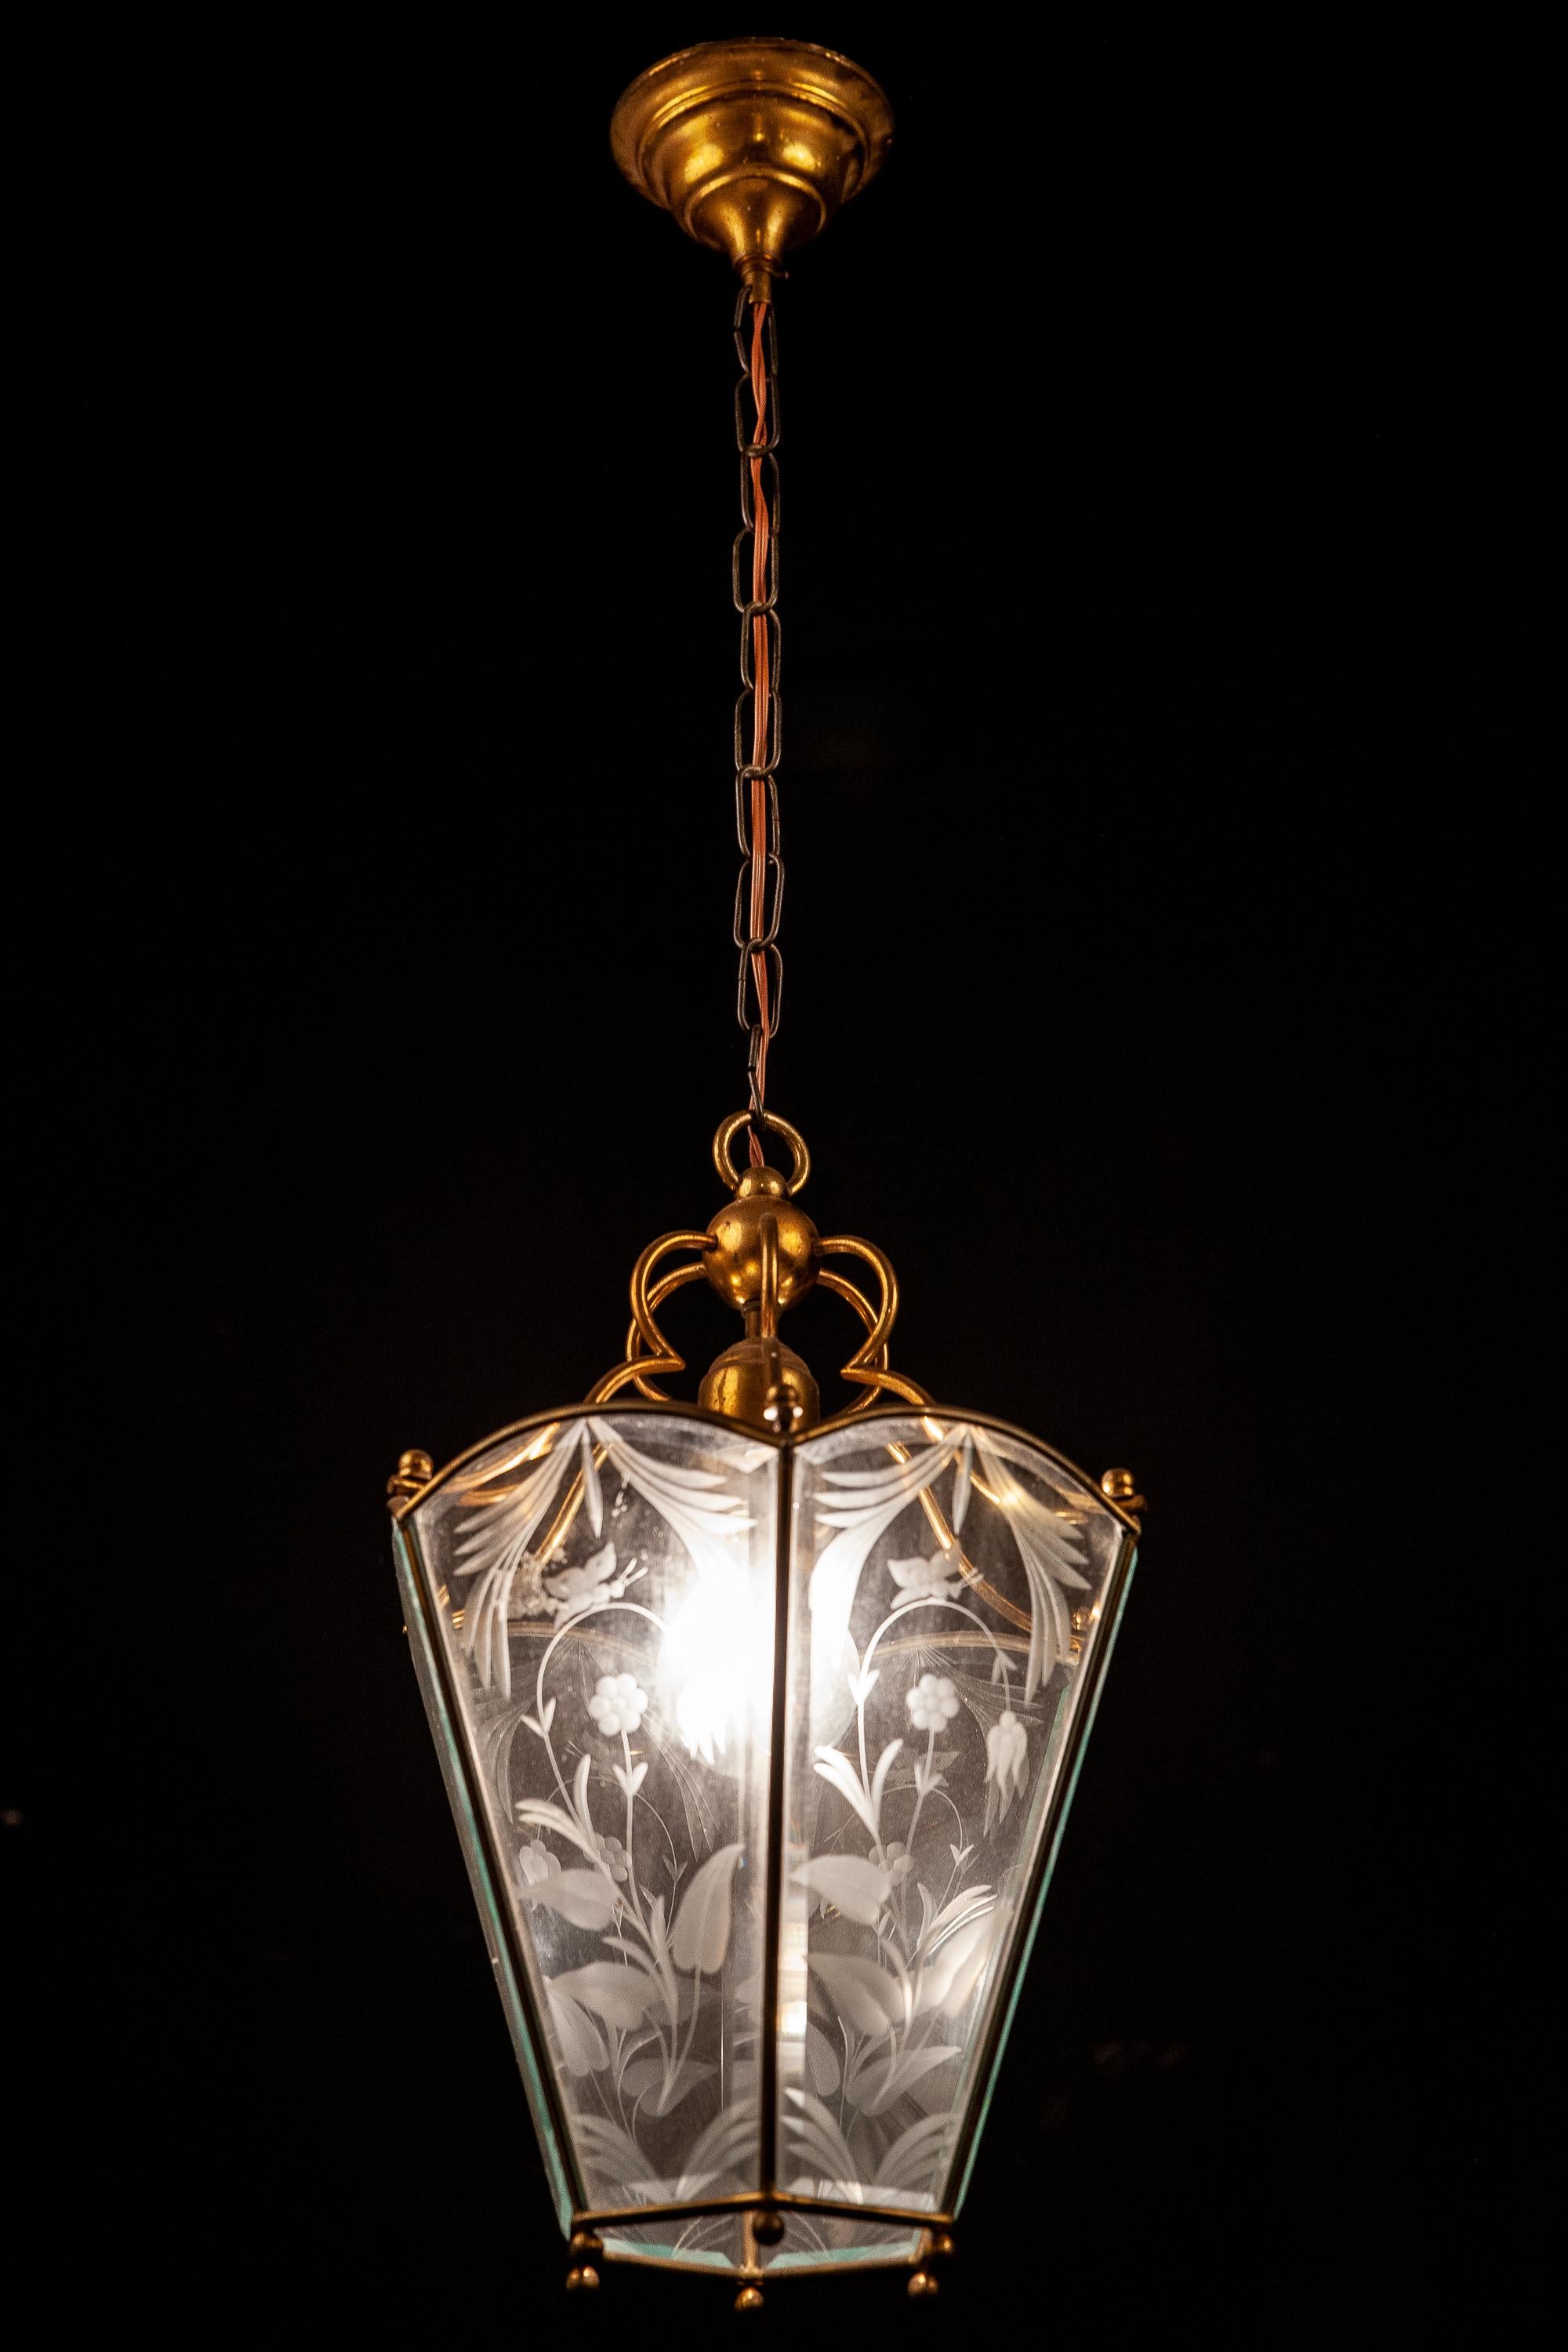 Brass-mounted with elegant engraving on glass, original conditions.
Measures: Height without chain 40 cm diameter 26 cm.
Single light bulb E 27.